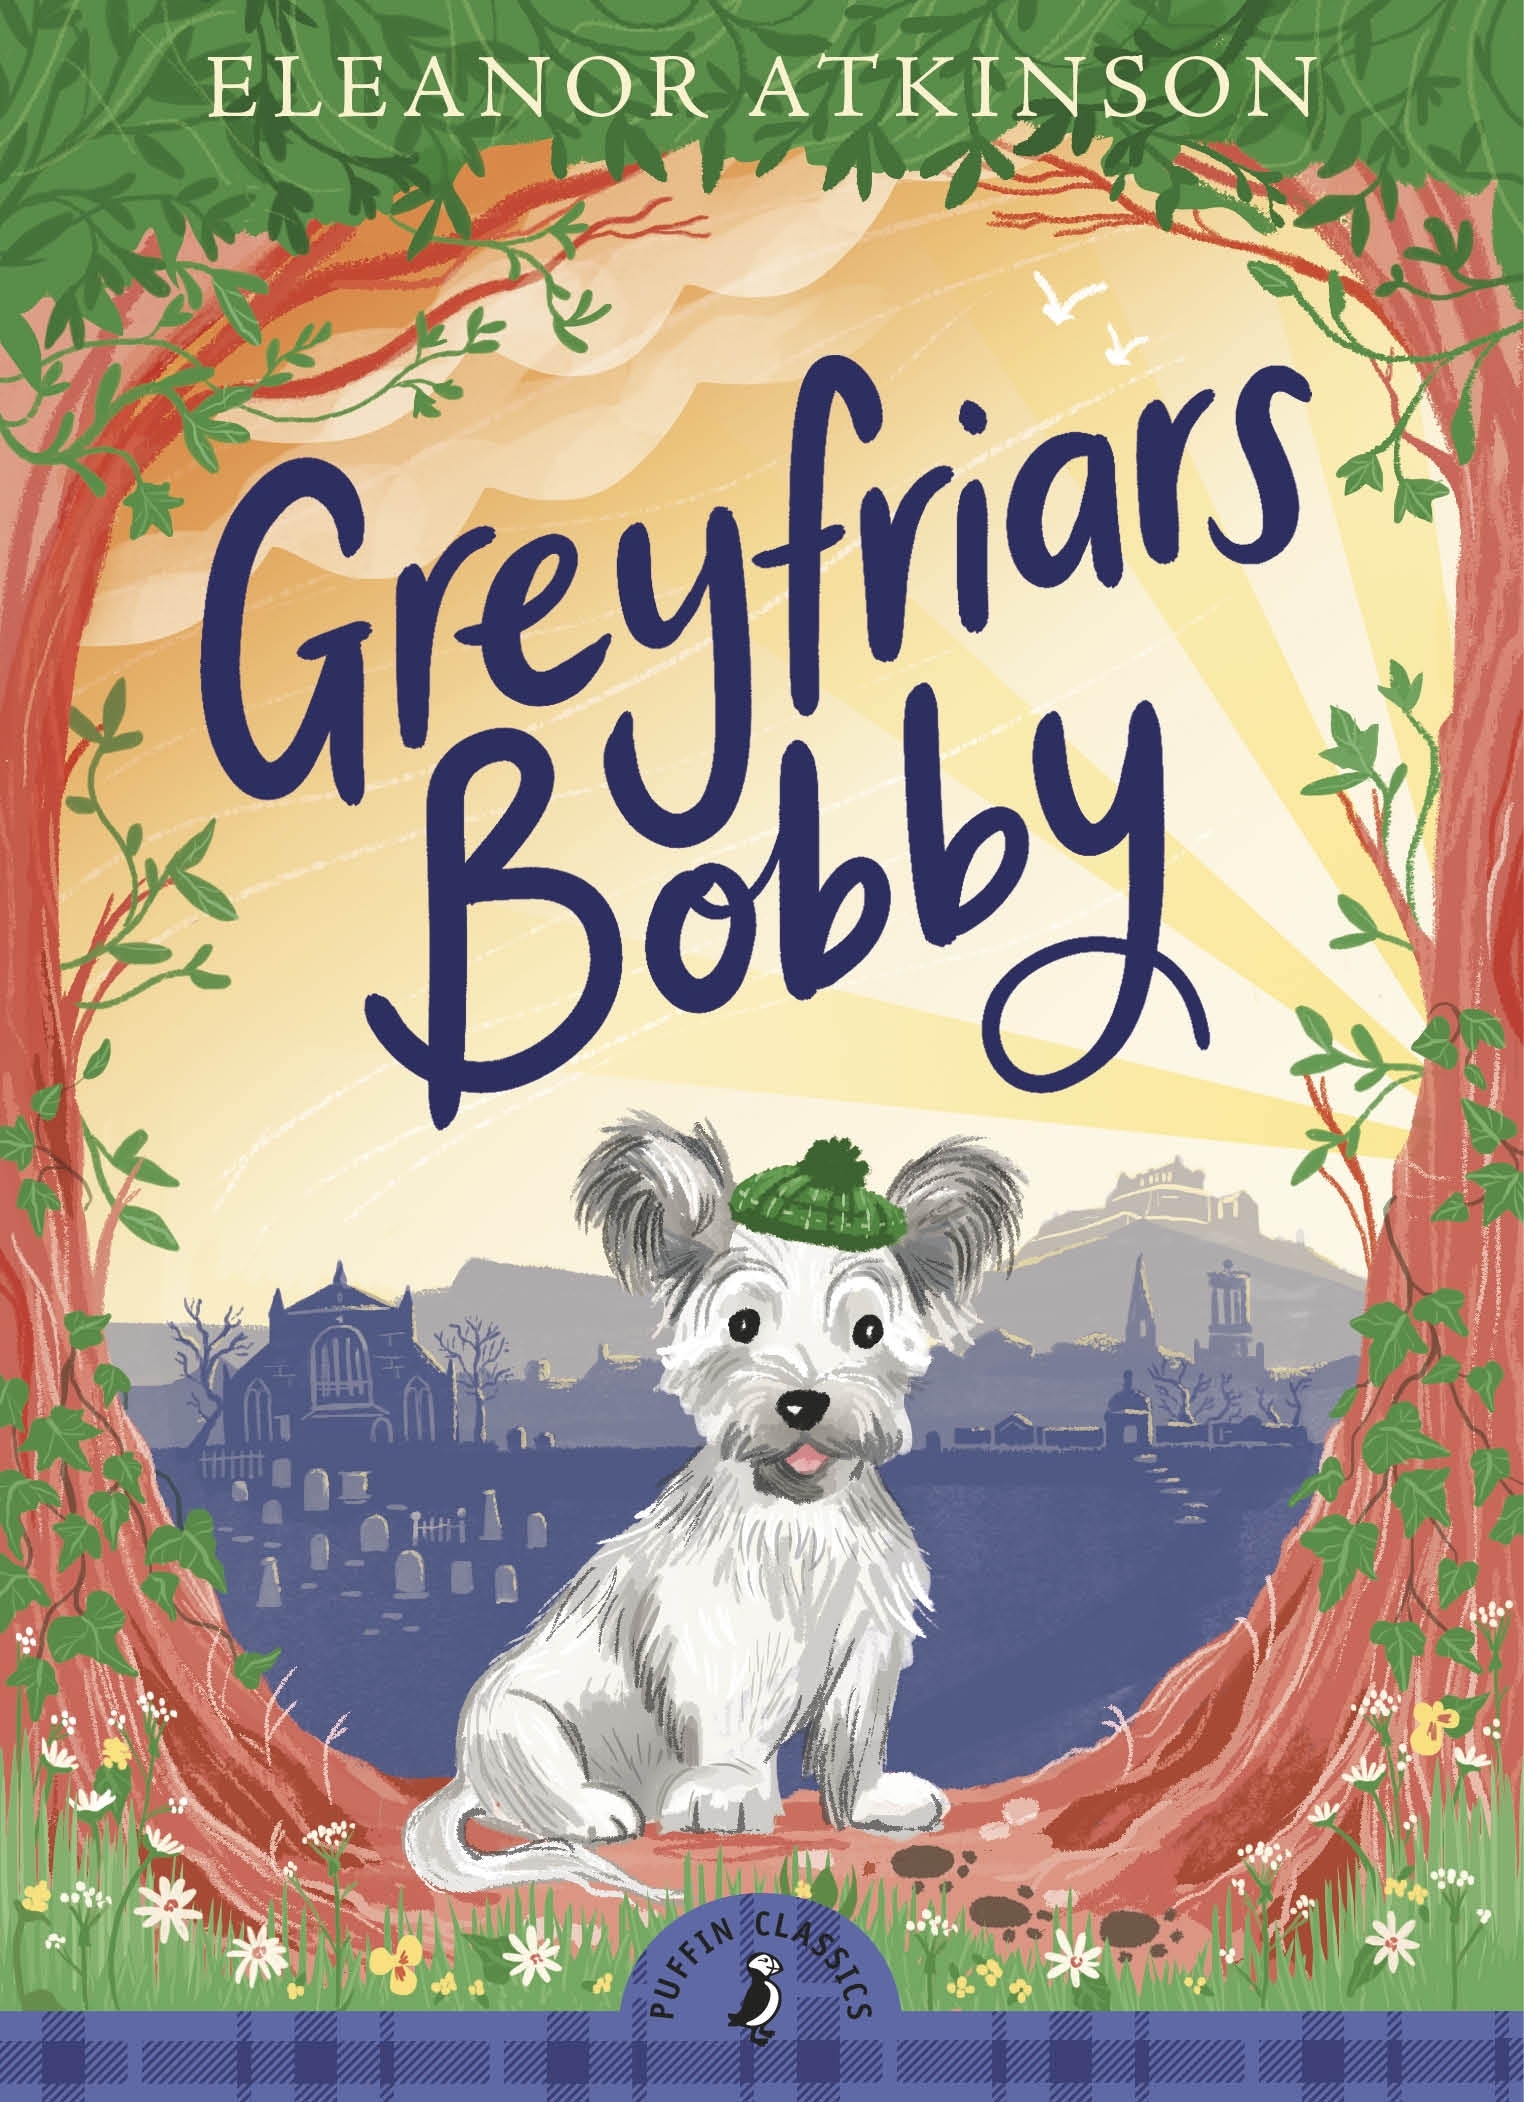 Book “Greyfriars Bobby” by Eleanor Atkinson — March 4, 2021